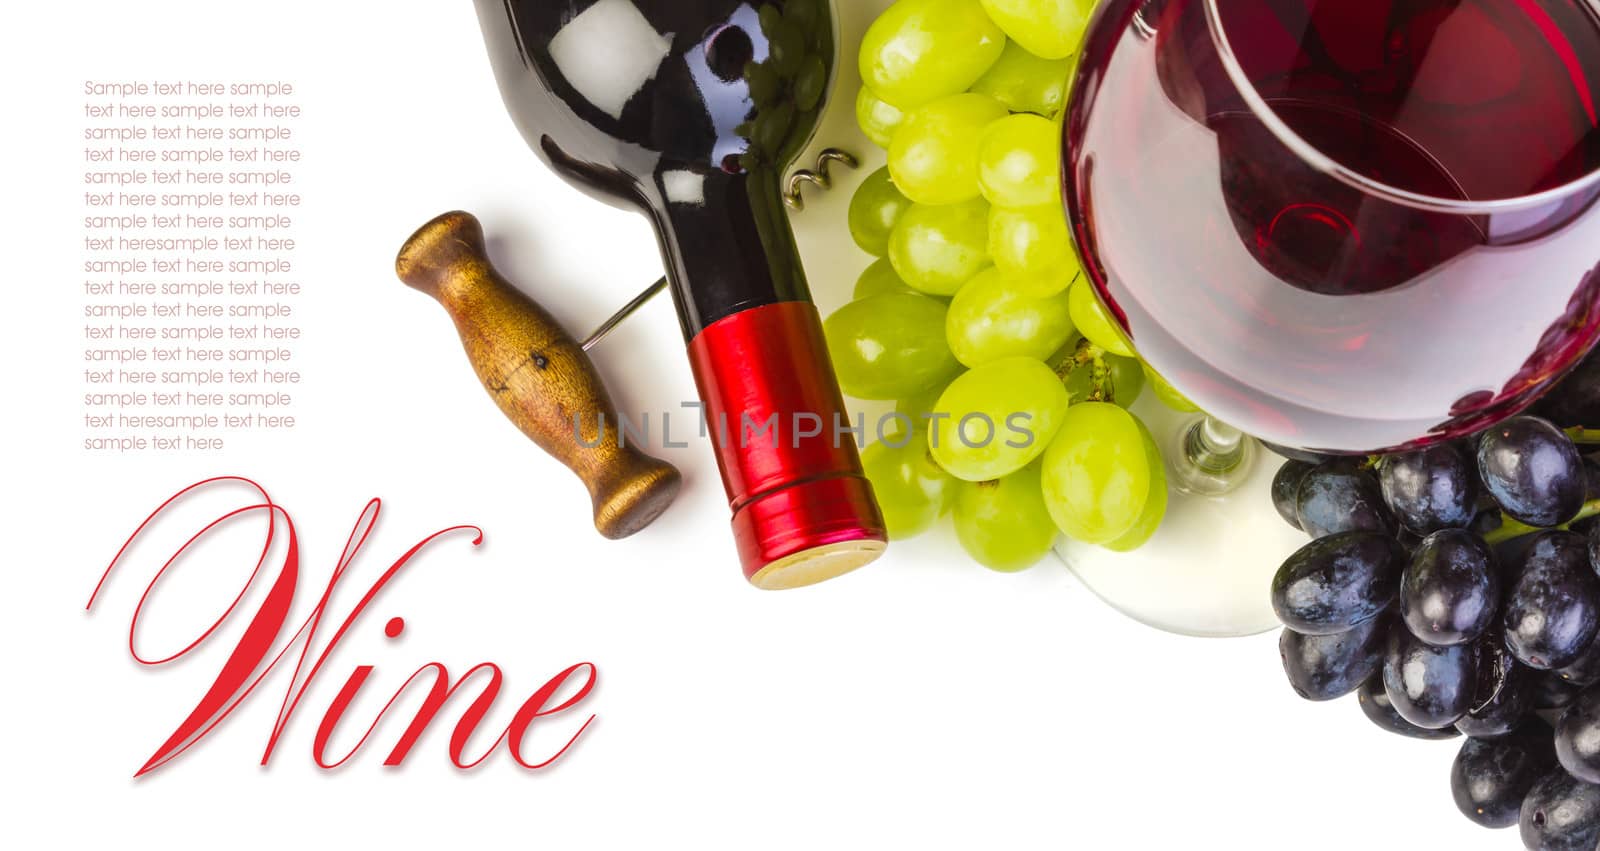 glass of red wine with bottle and grapes on a white background